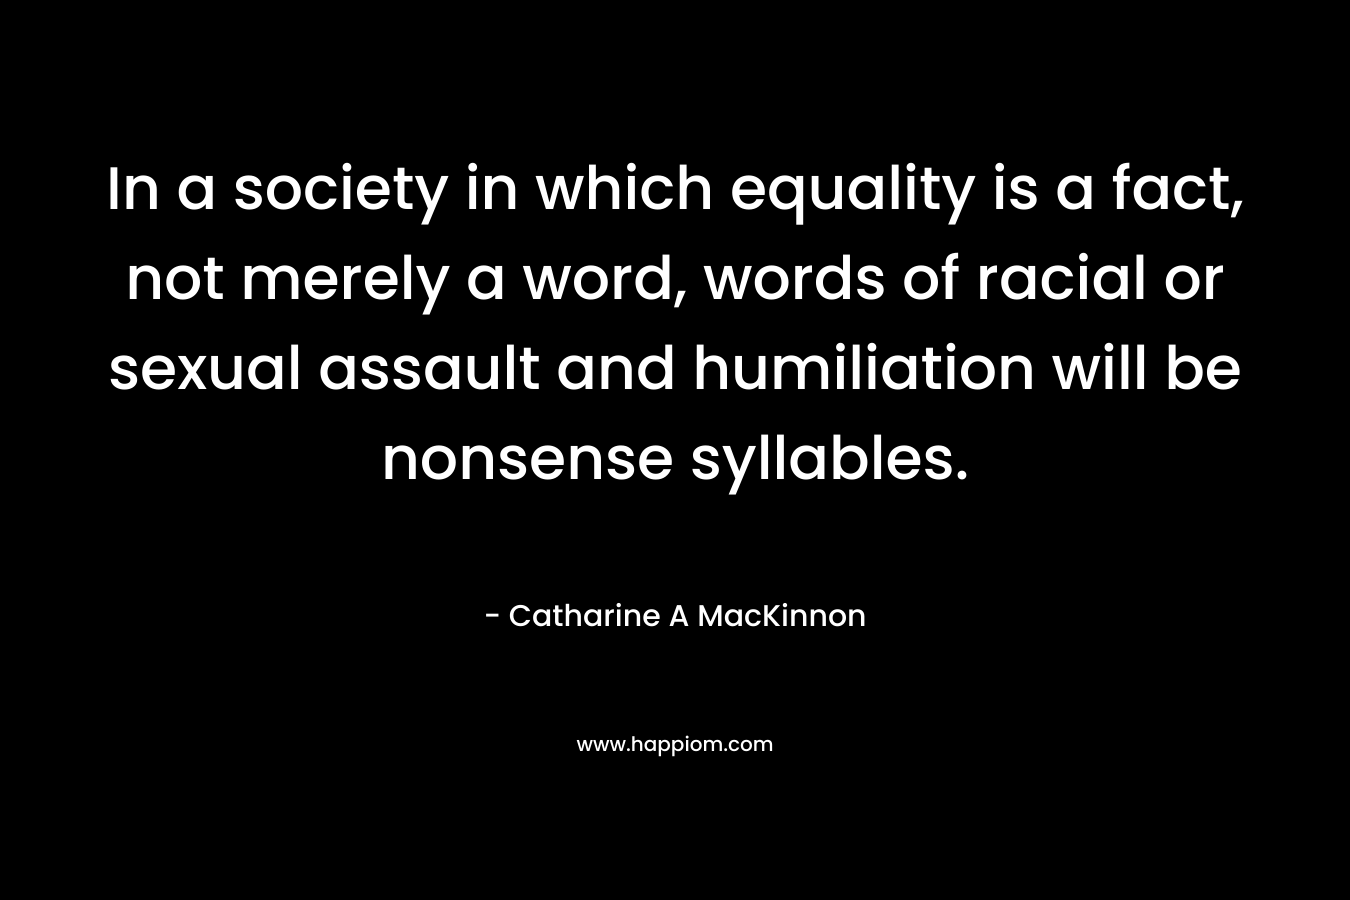 In a society in which equality is a fact, not merely a word, words of racial or sexual assault and humiliation will be nonsense syllables. – Catharine A MacKinnon